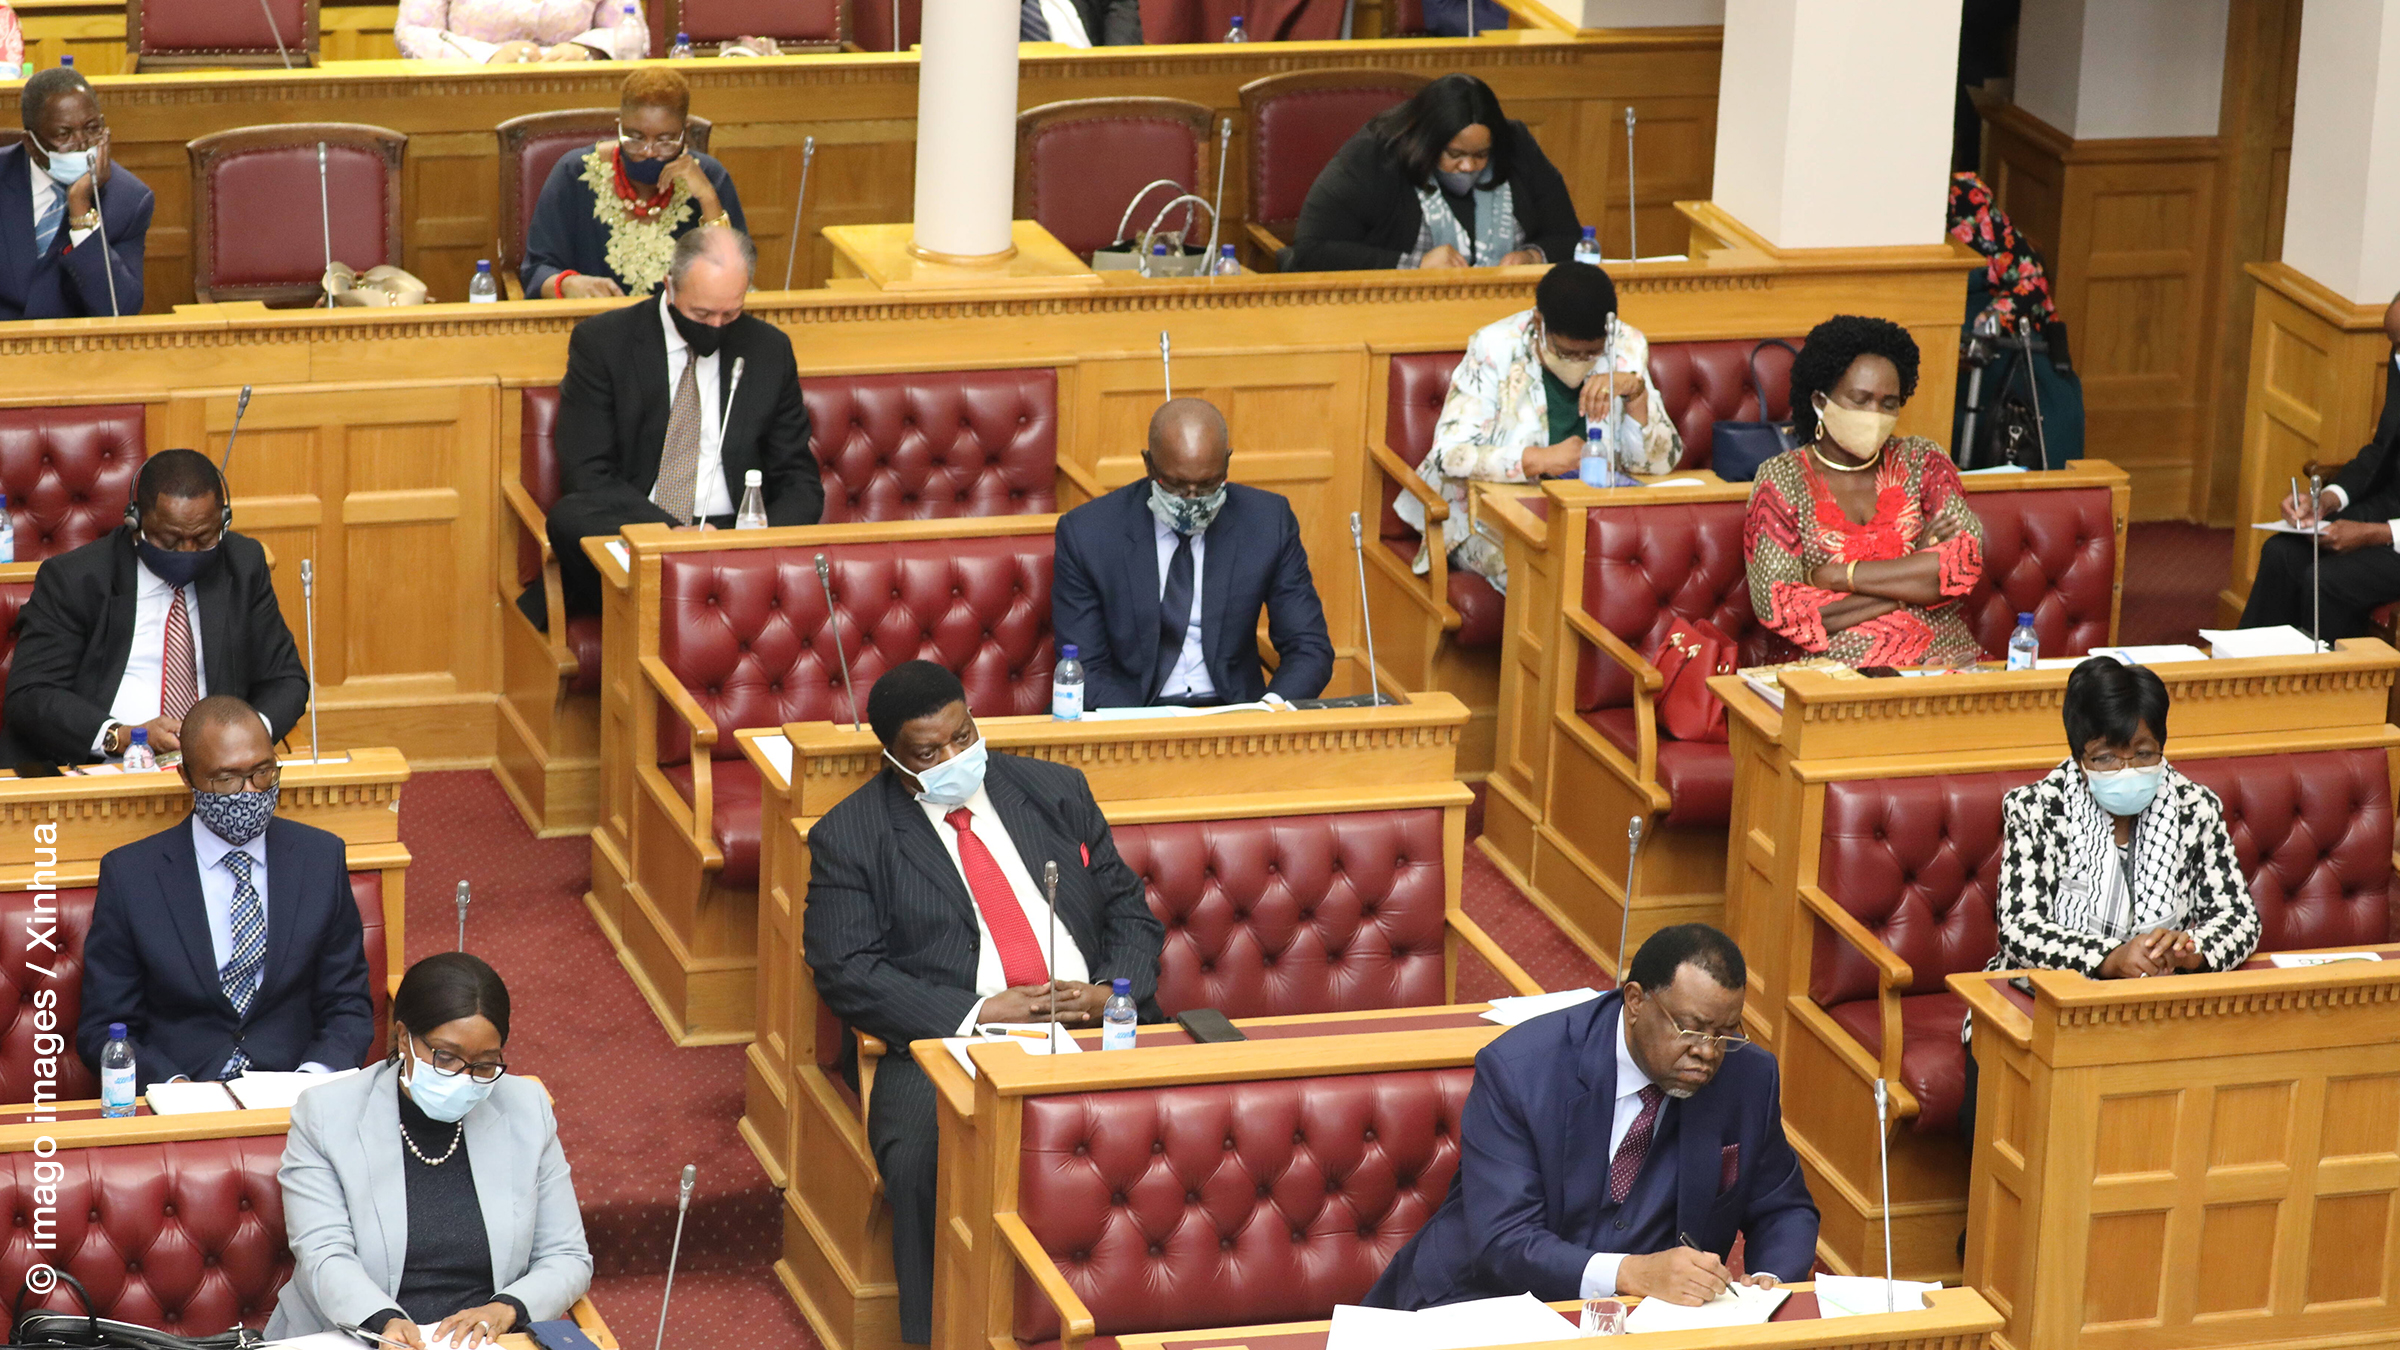 Members of Namibian parliament listen to President Hage Geingob delivering his state of the nation address in Windhoek, capital of Namibia, on June 4, 2020